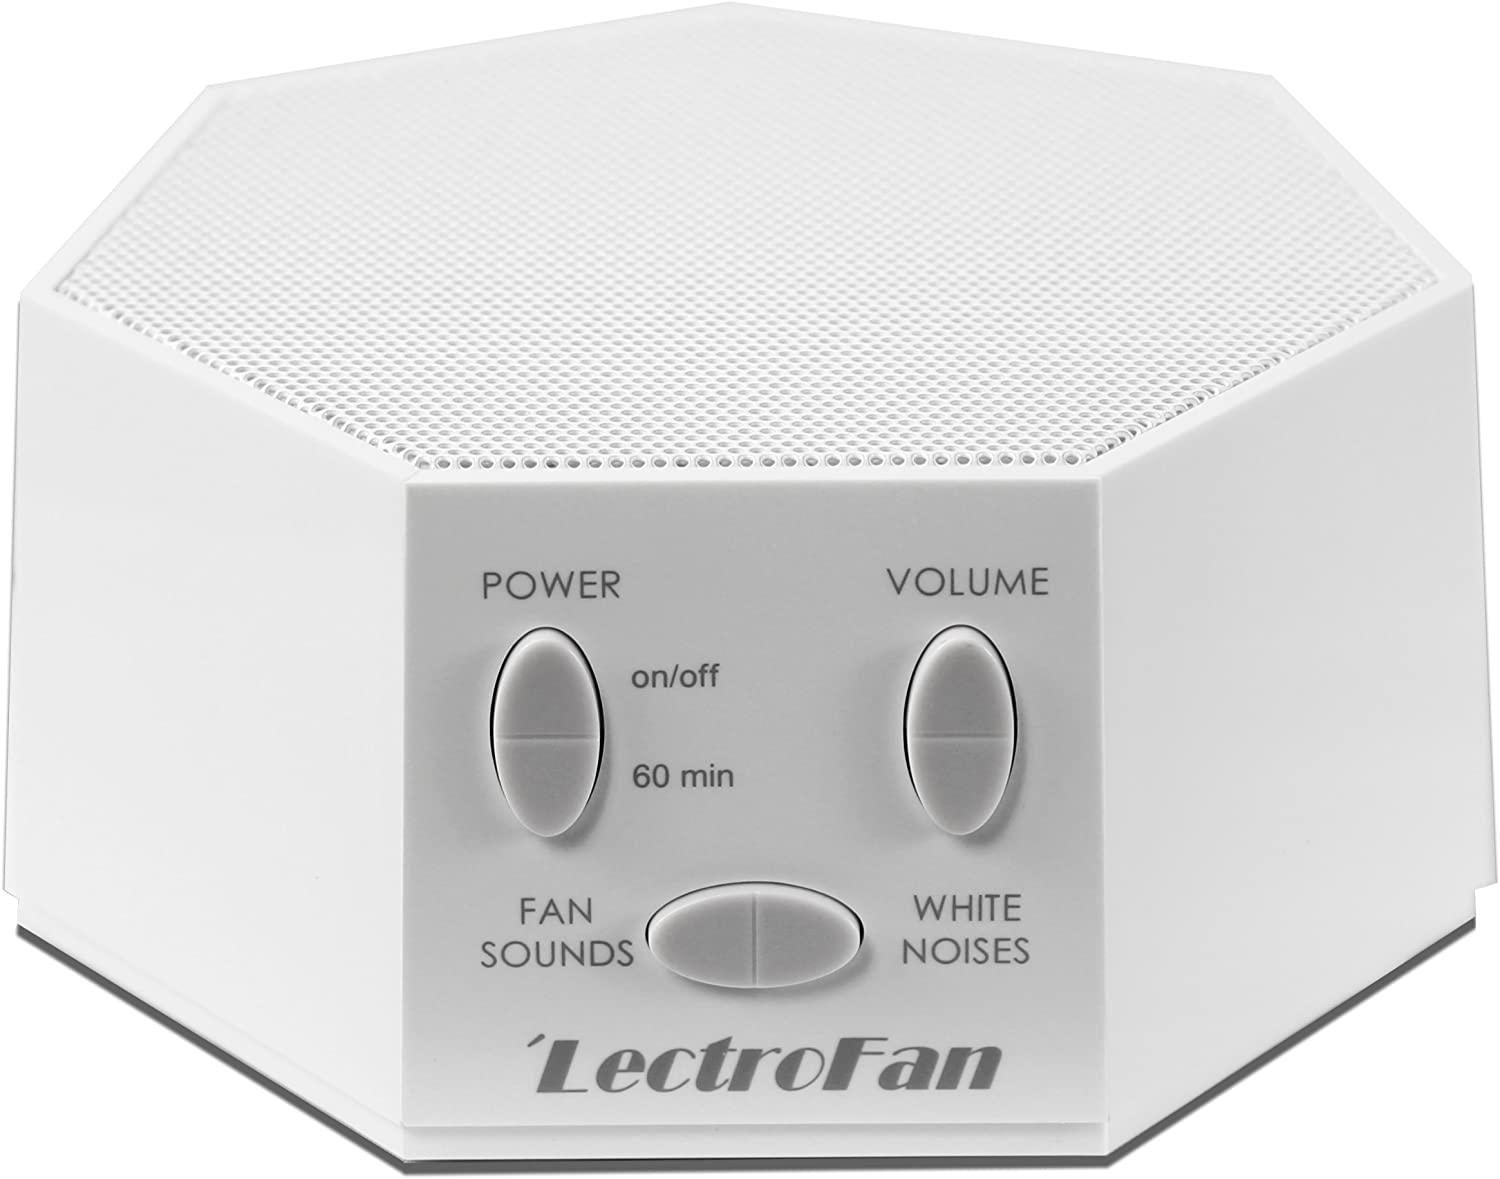 LectroFan High Fidelity White Noise Machine for $29.95 Shipped